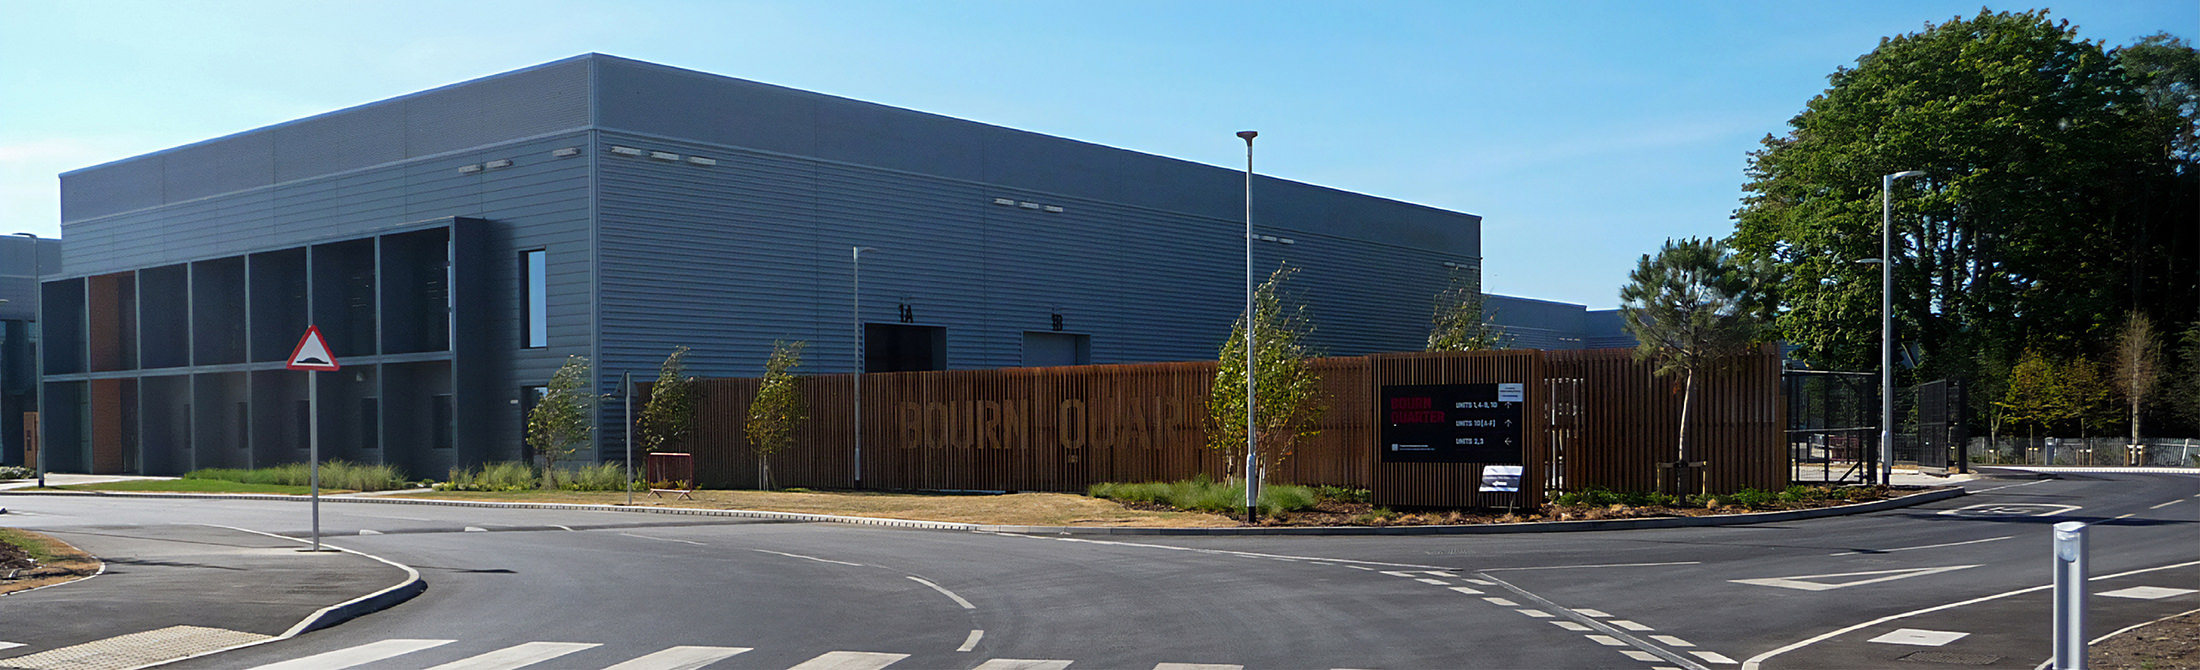 New Build Business Park with Bin Screen Systems